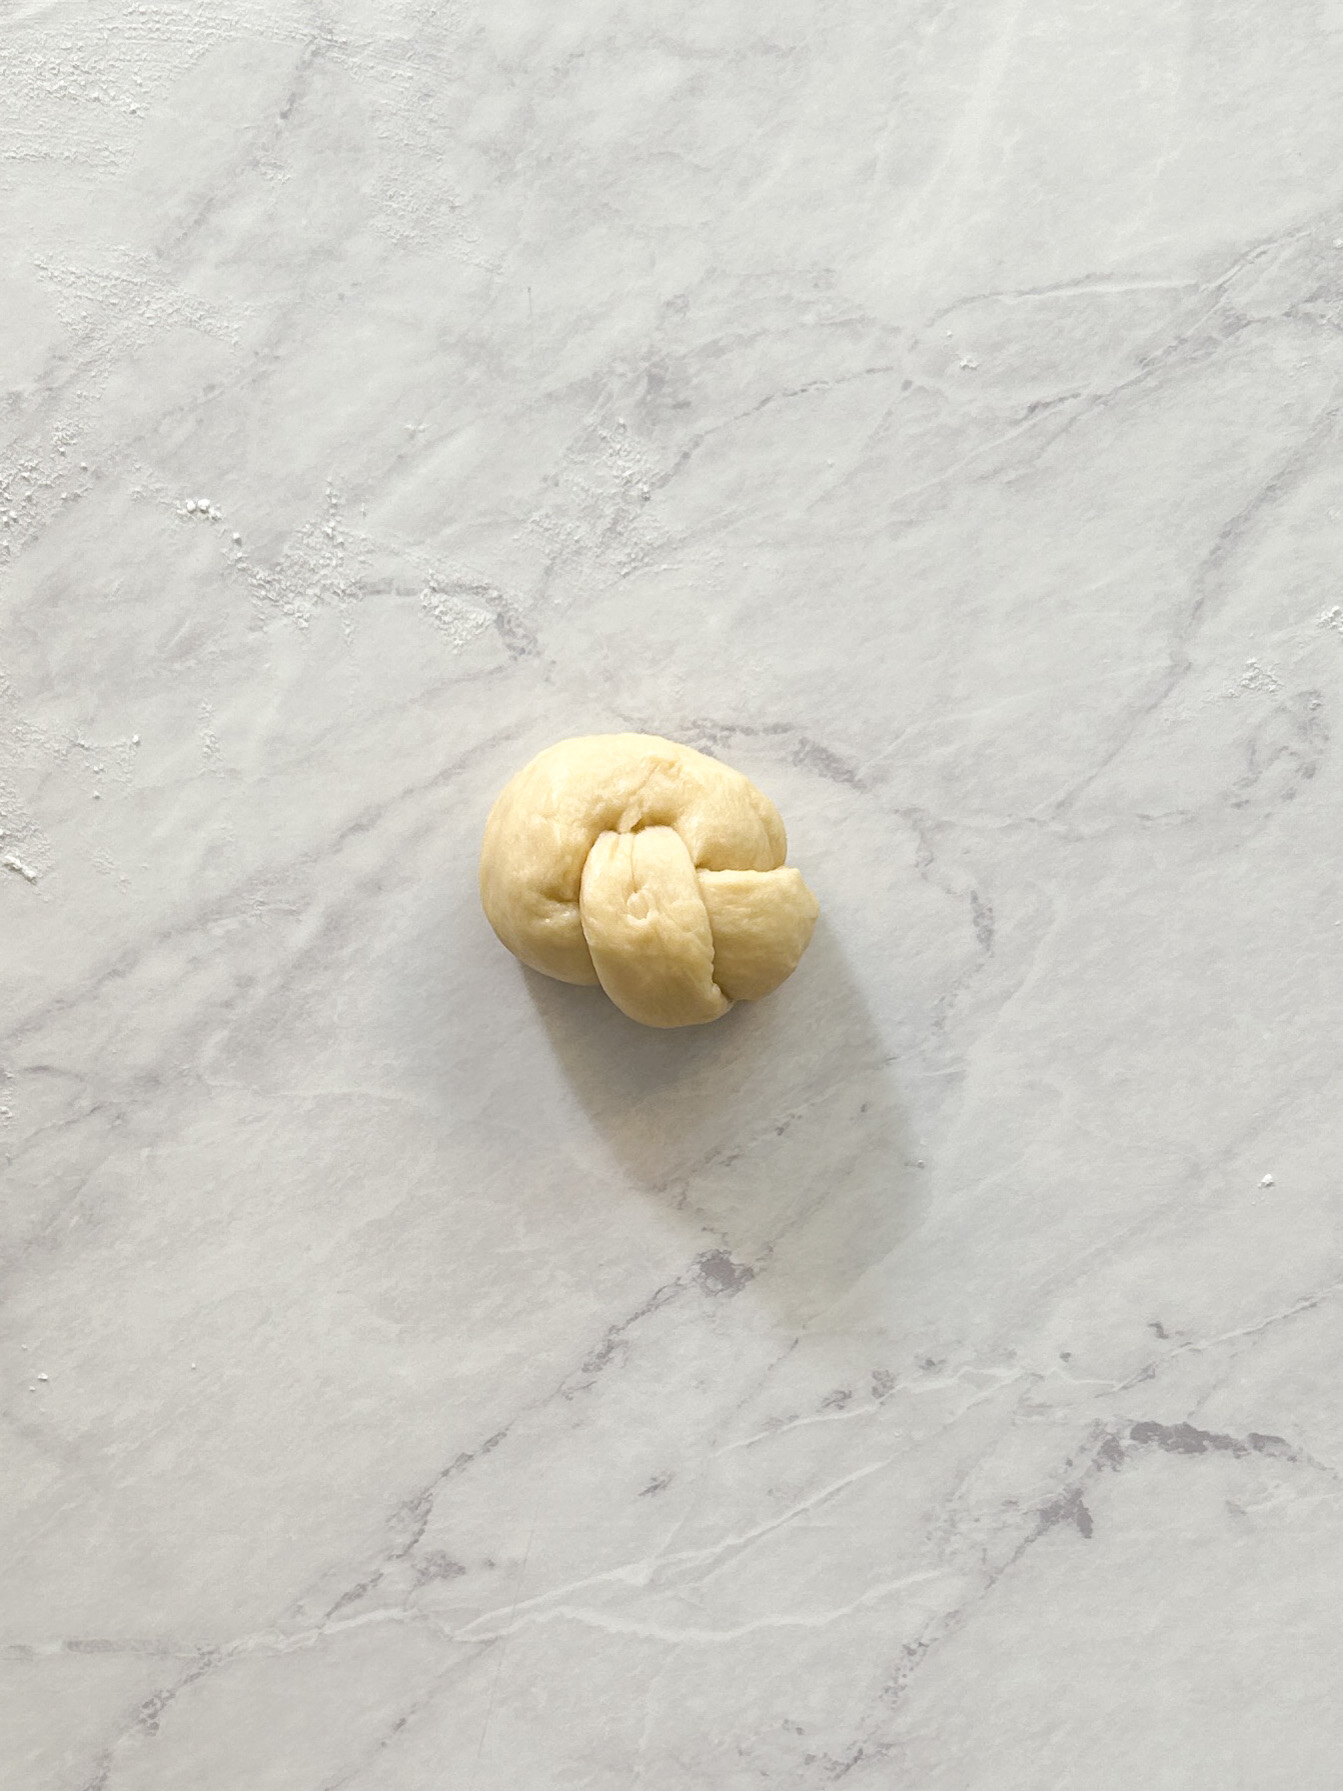 other end of garlic knot tucked in to make proper garlic knot shape